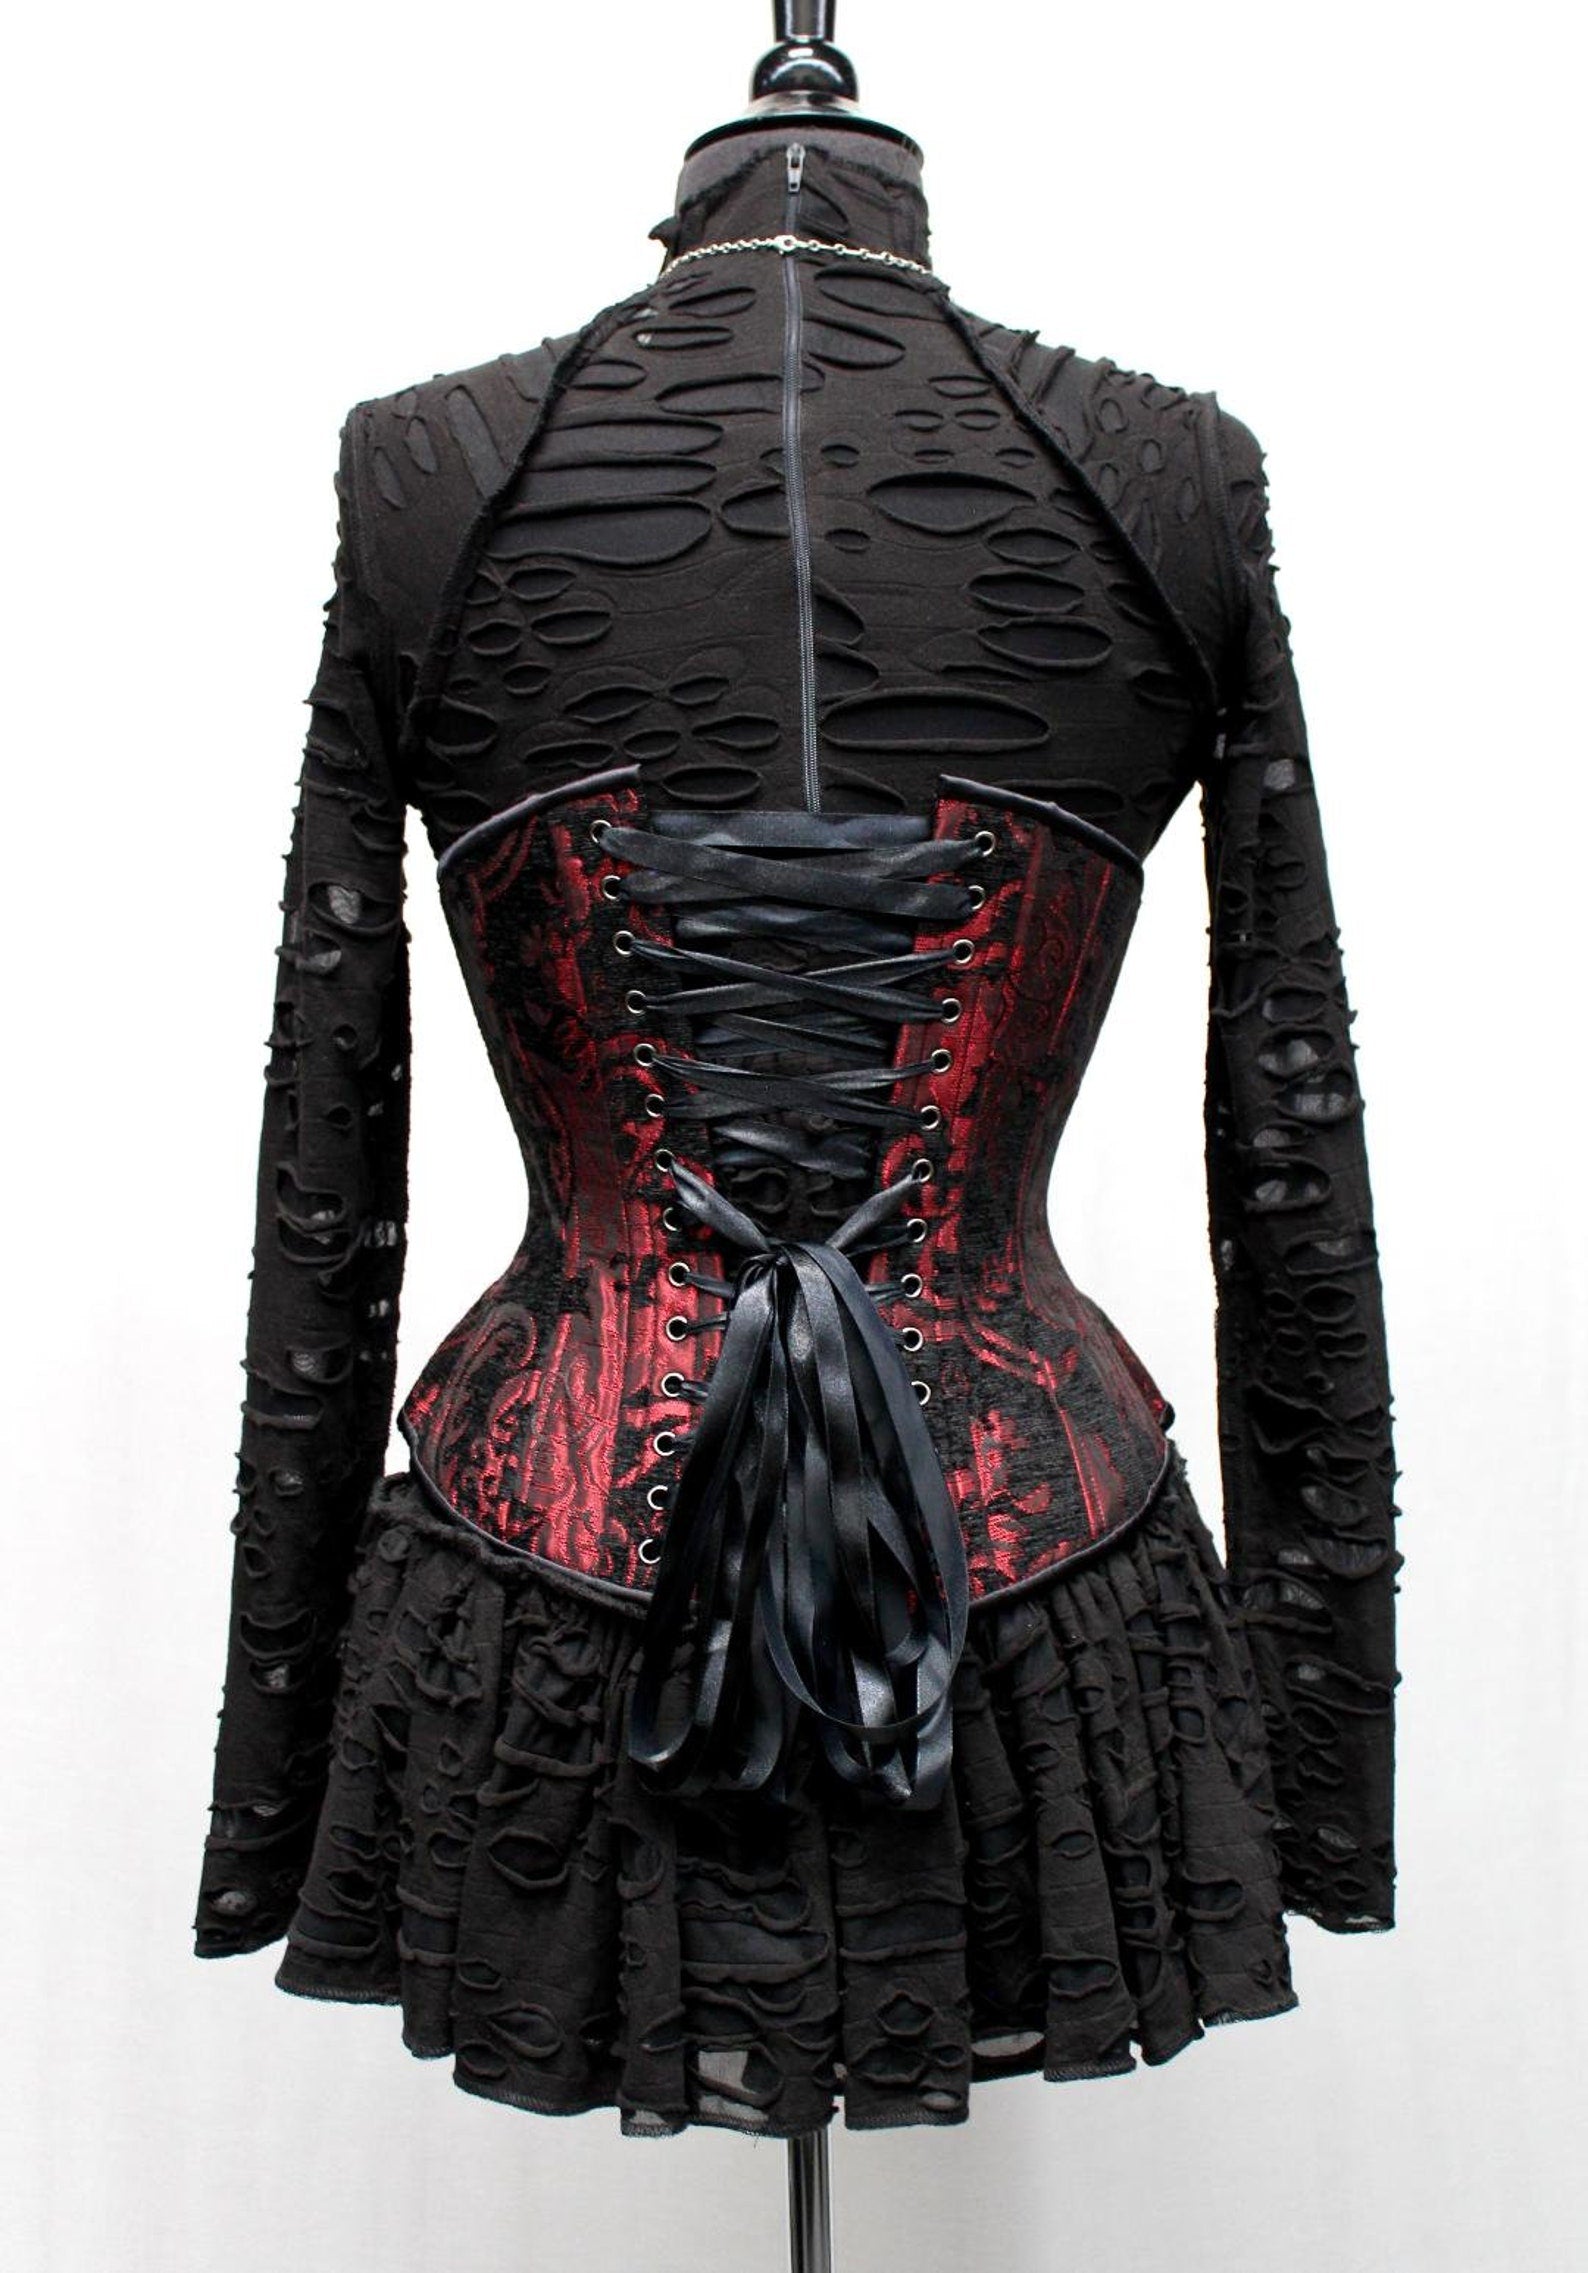 TAPESTRY CORSET - RED/BLACK by Shrine of Hollywood